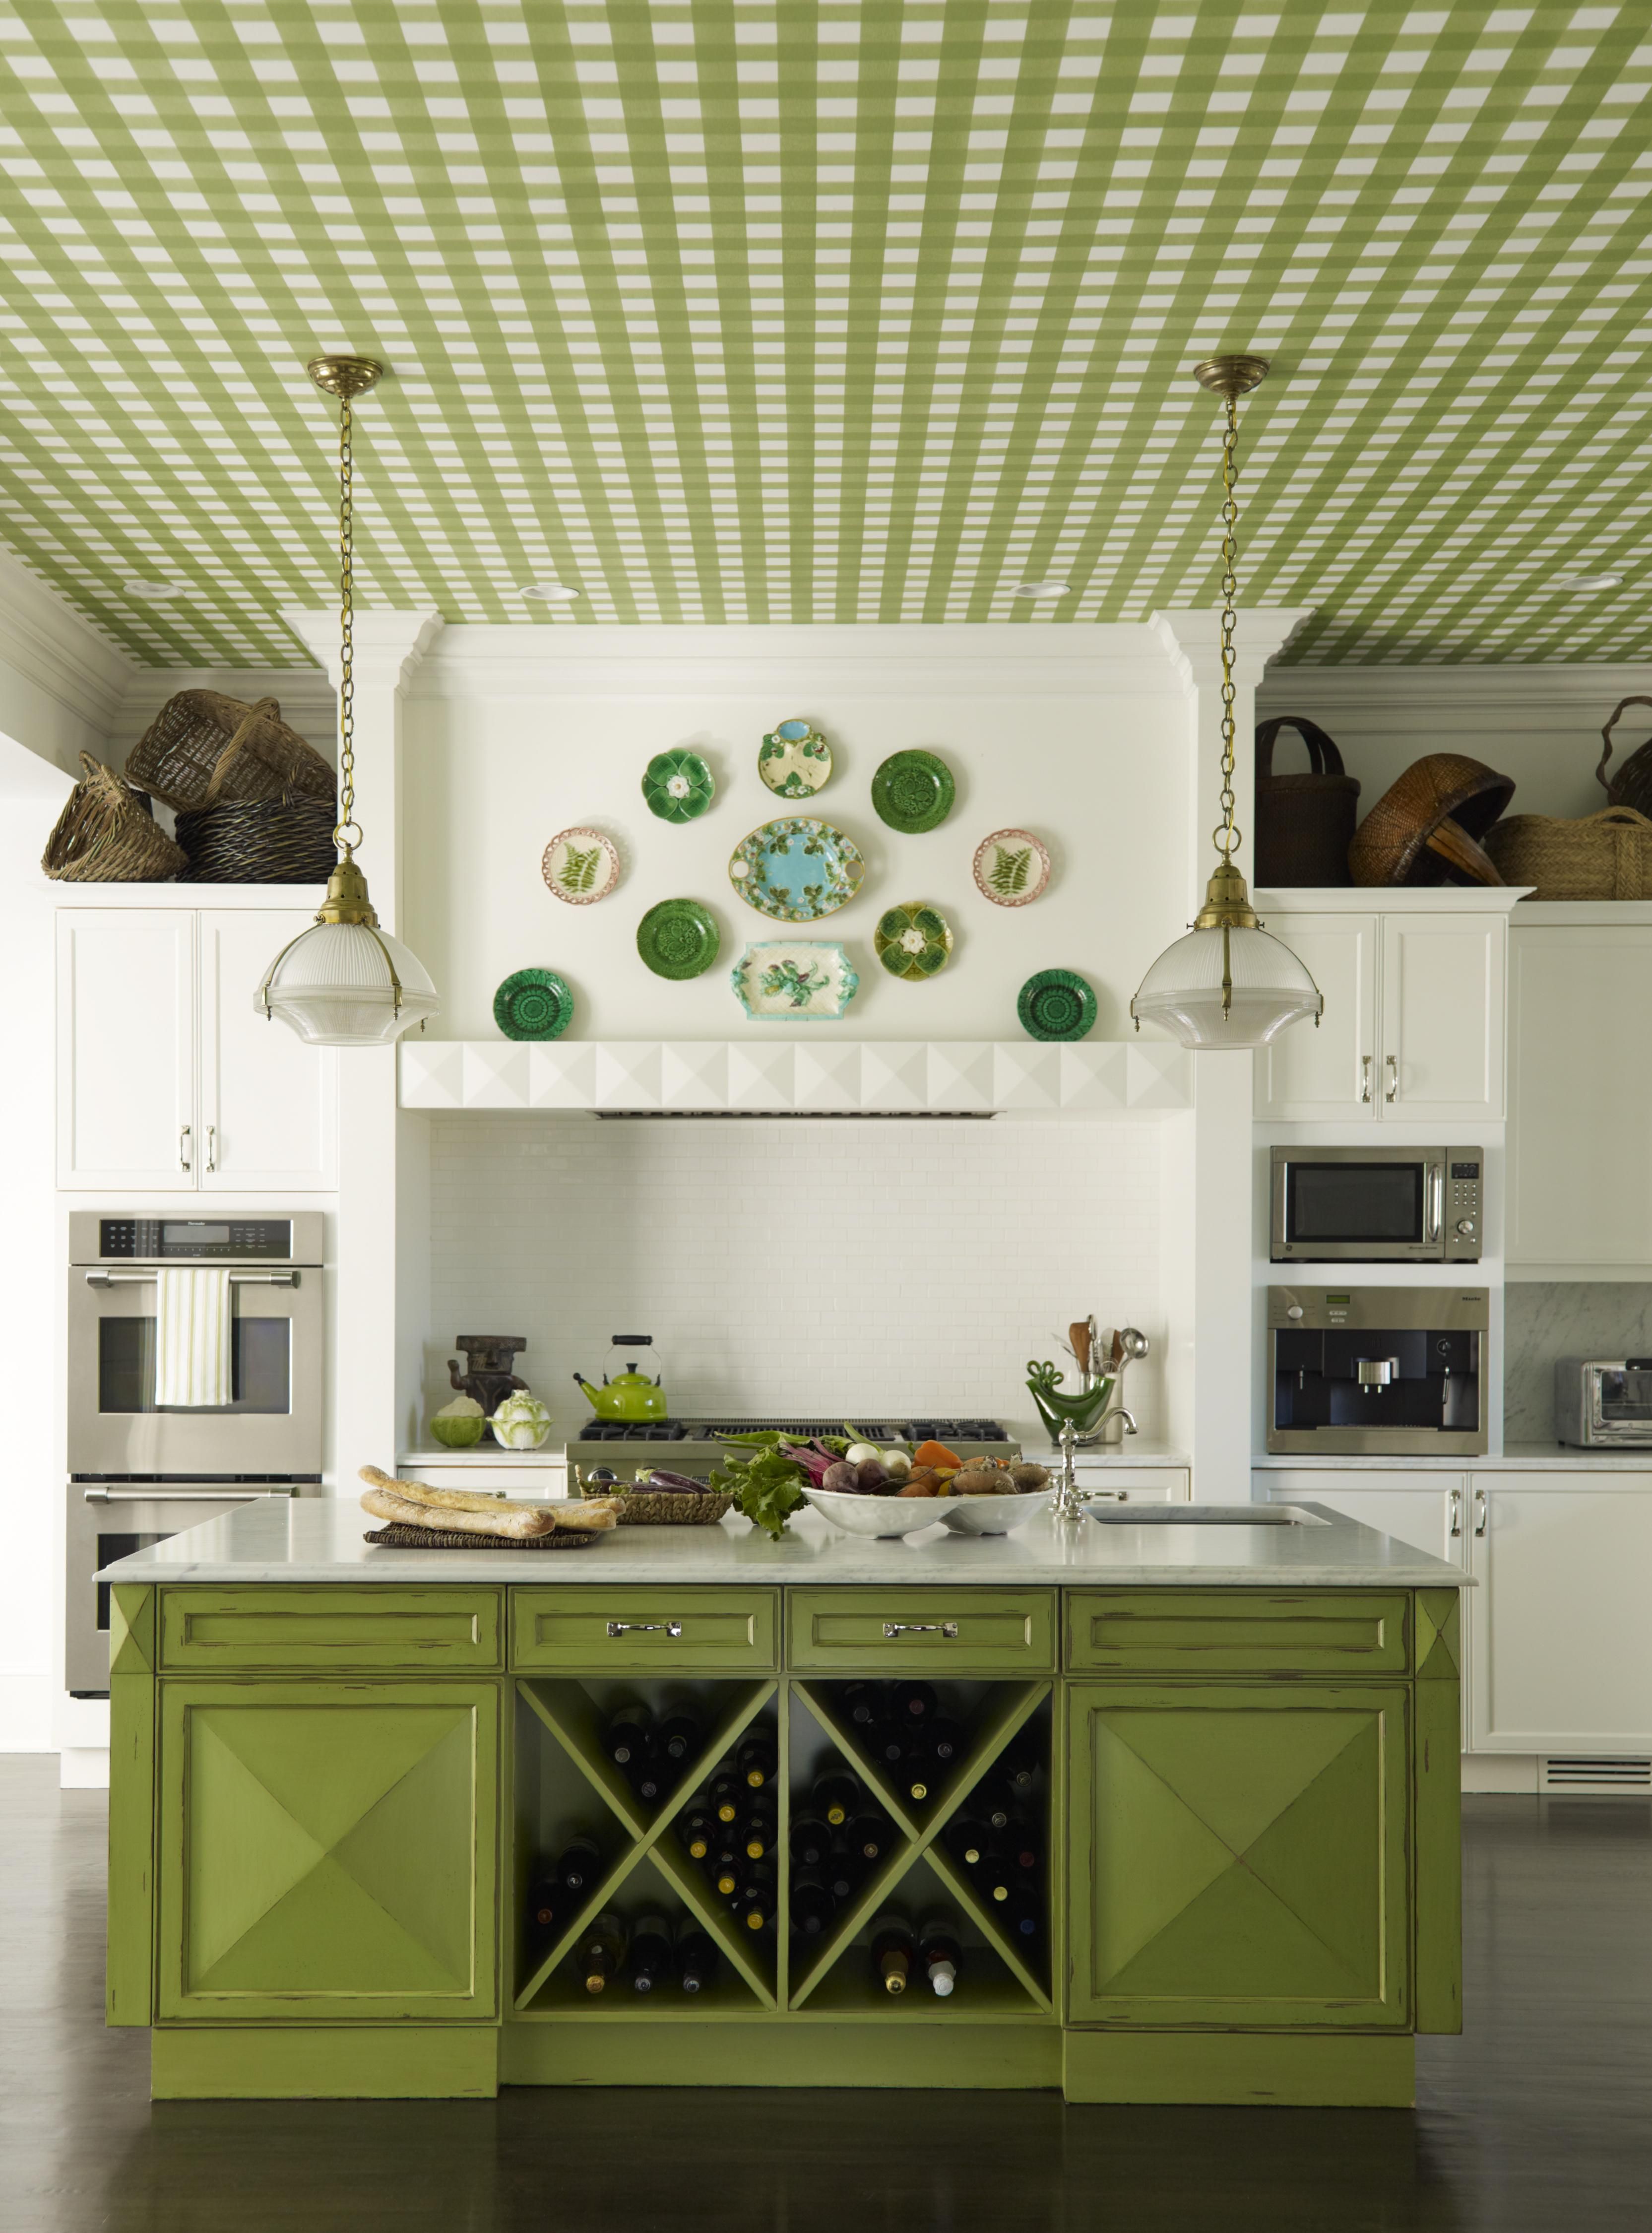 10 Colorful Kitchens That Buck The All-White Trend – SheKnows